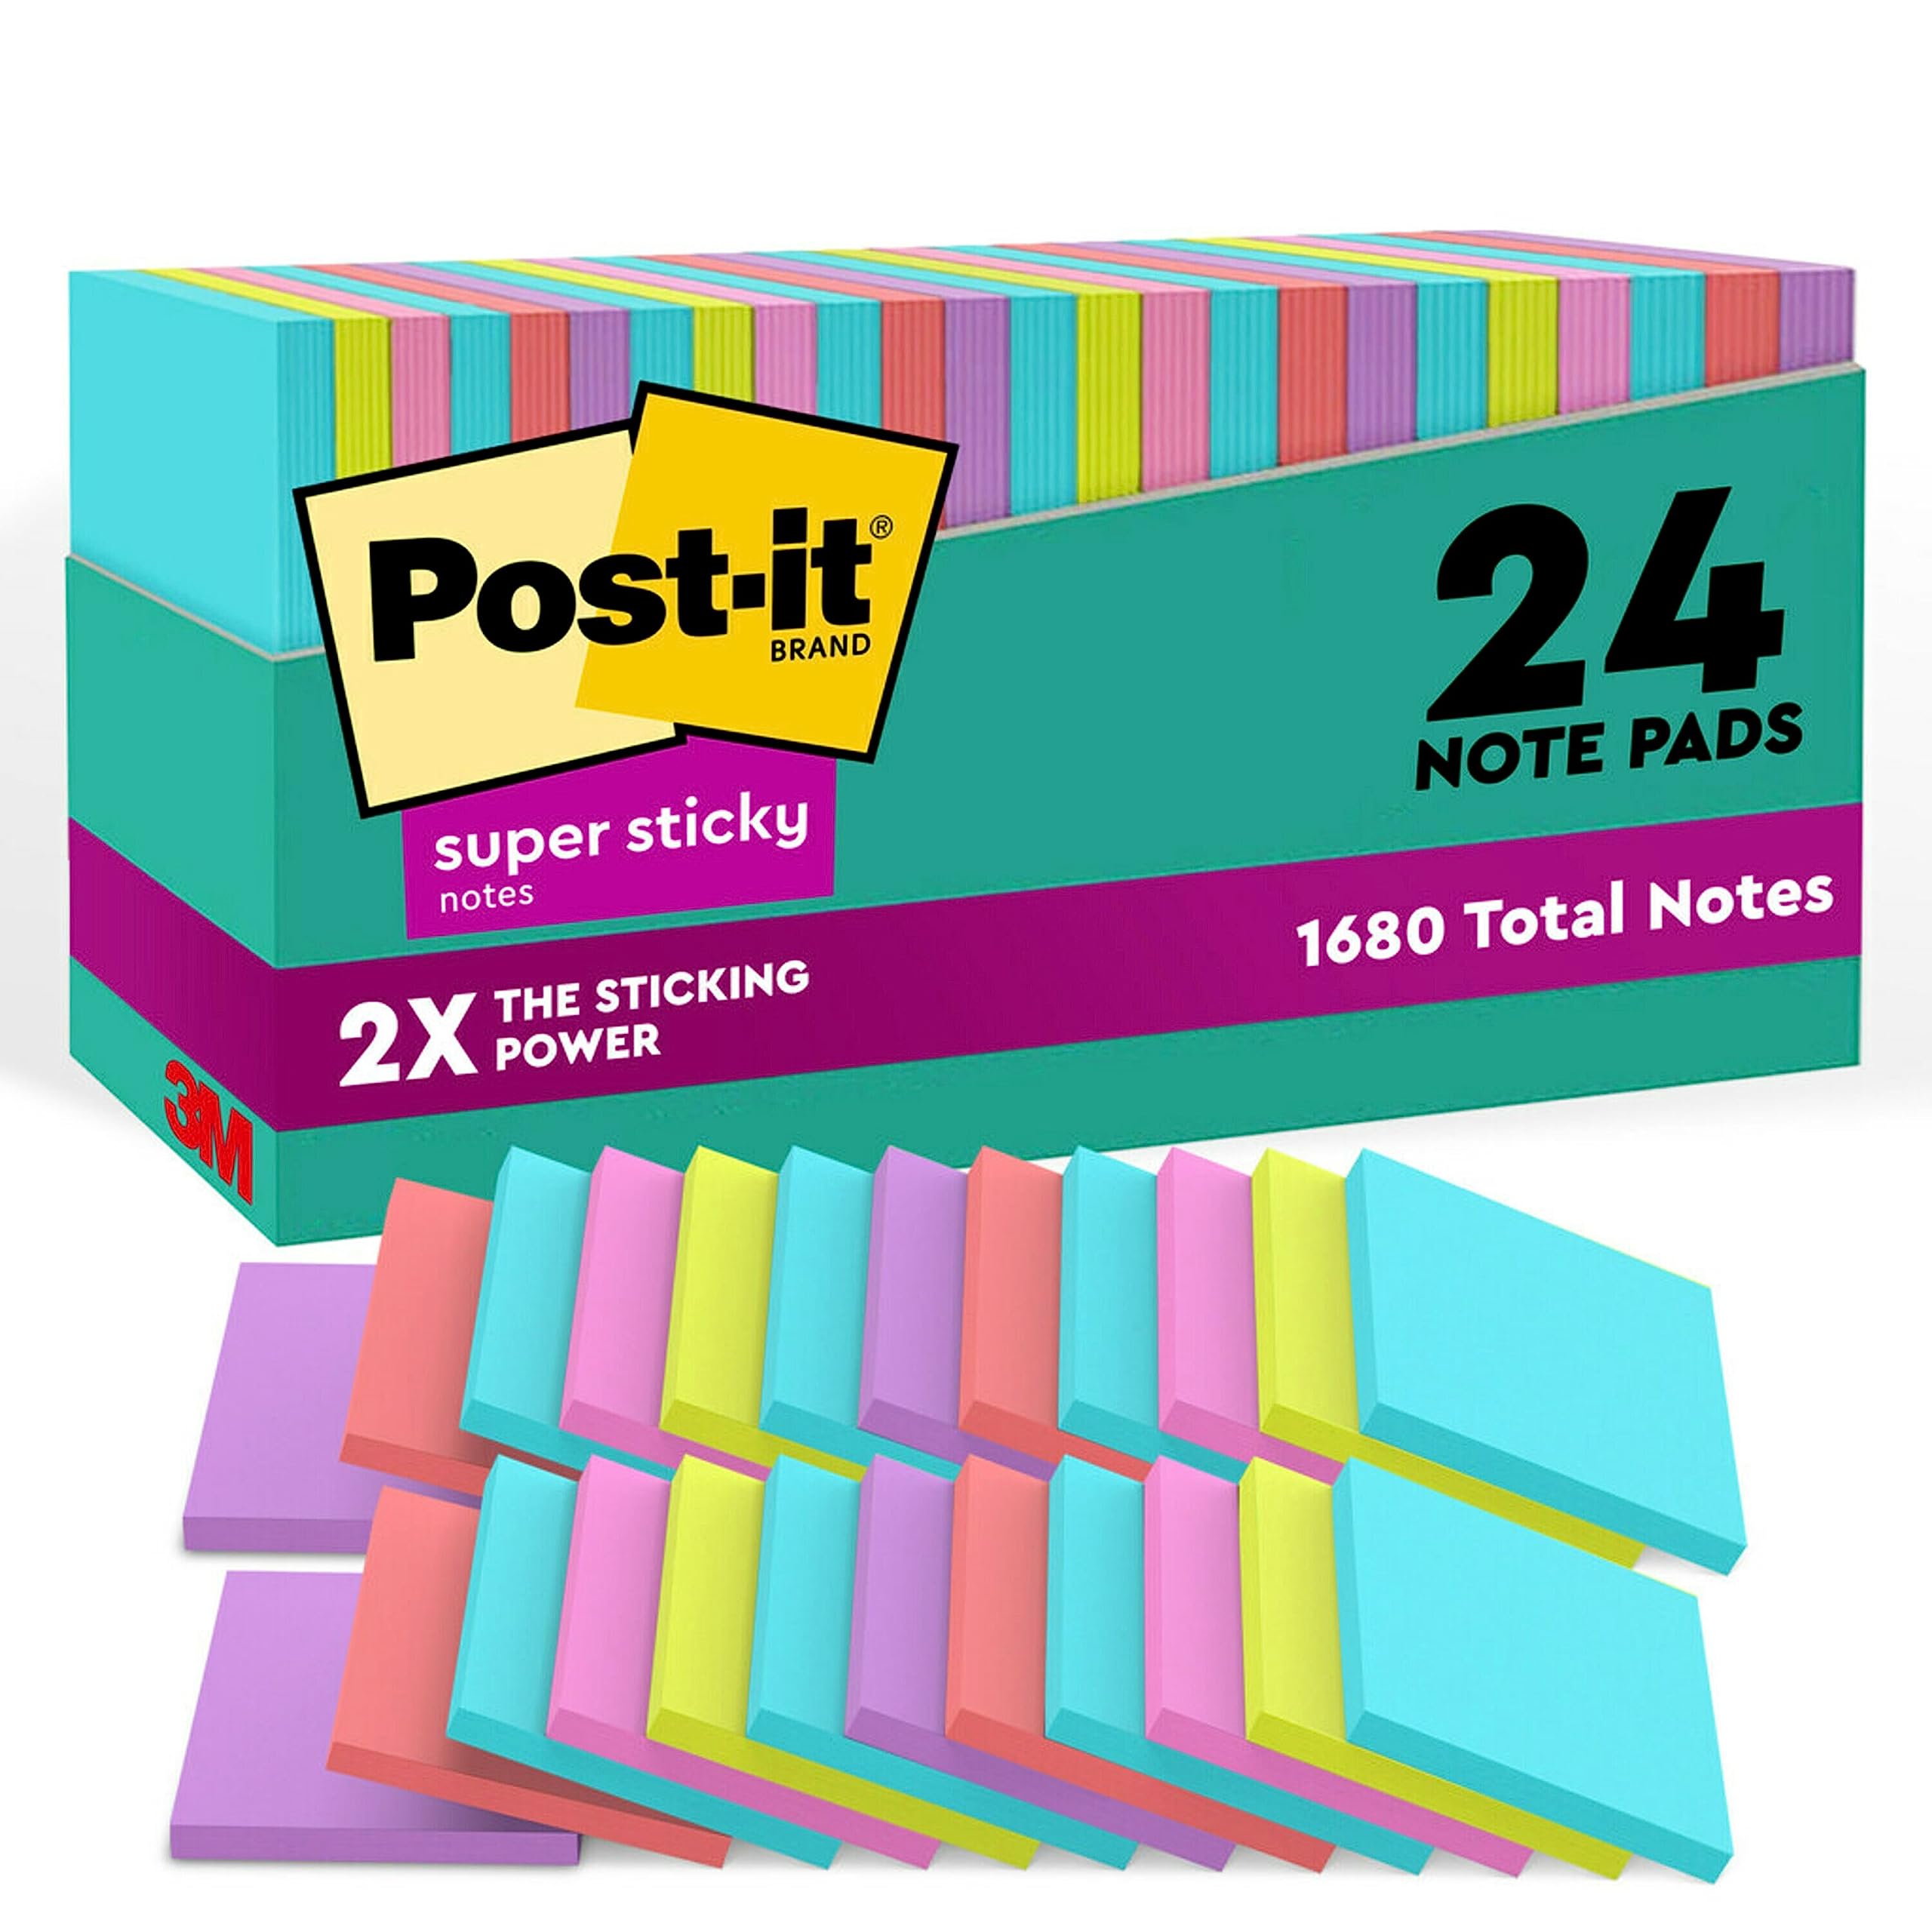 Book Cover Post-it Super Sticky Notes, 24 Note Pads, 3x3 in., 2x the Sticking Power, School Supplies and Office Products, Sticky Notes for Vertical Surfaces, Monitors, Walls & Windows, Supernova Neons Collection